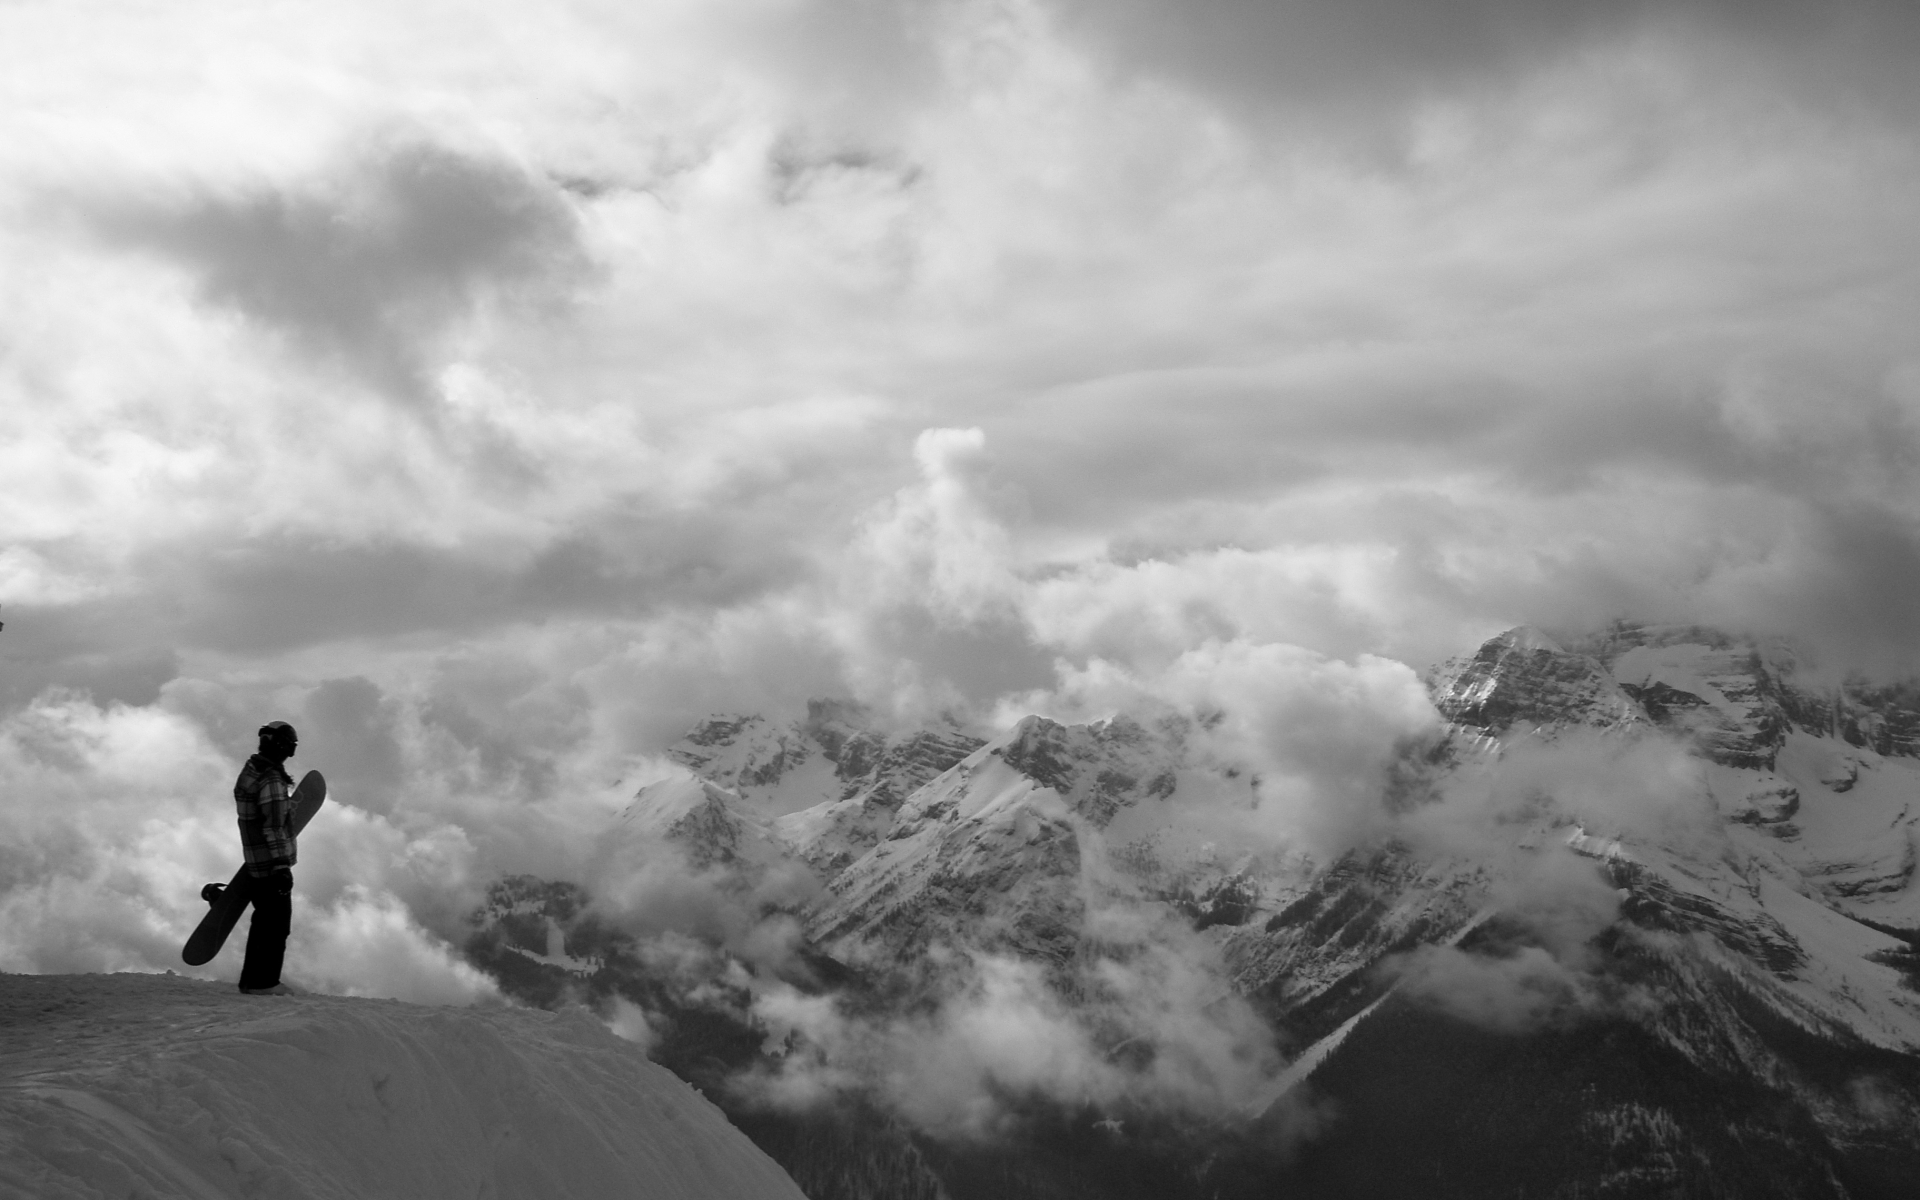 snowboard, Black, White, B w, Landscape, Nature, Snow, Mountain, Sky, Clouds, Scenic, People, Cliff, Photography Wallpaper